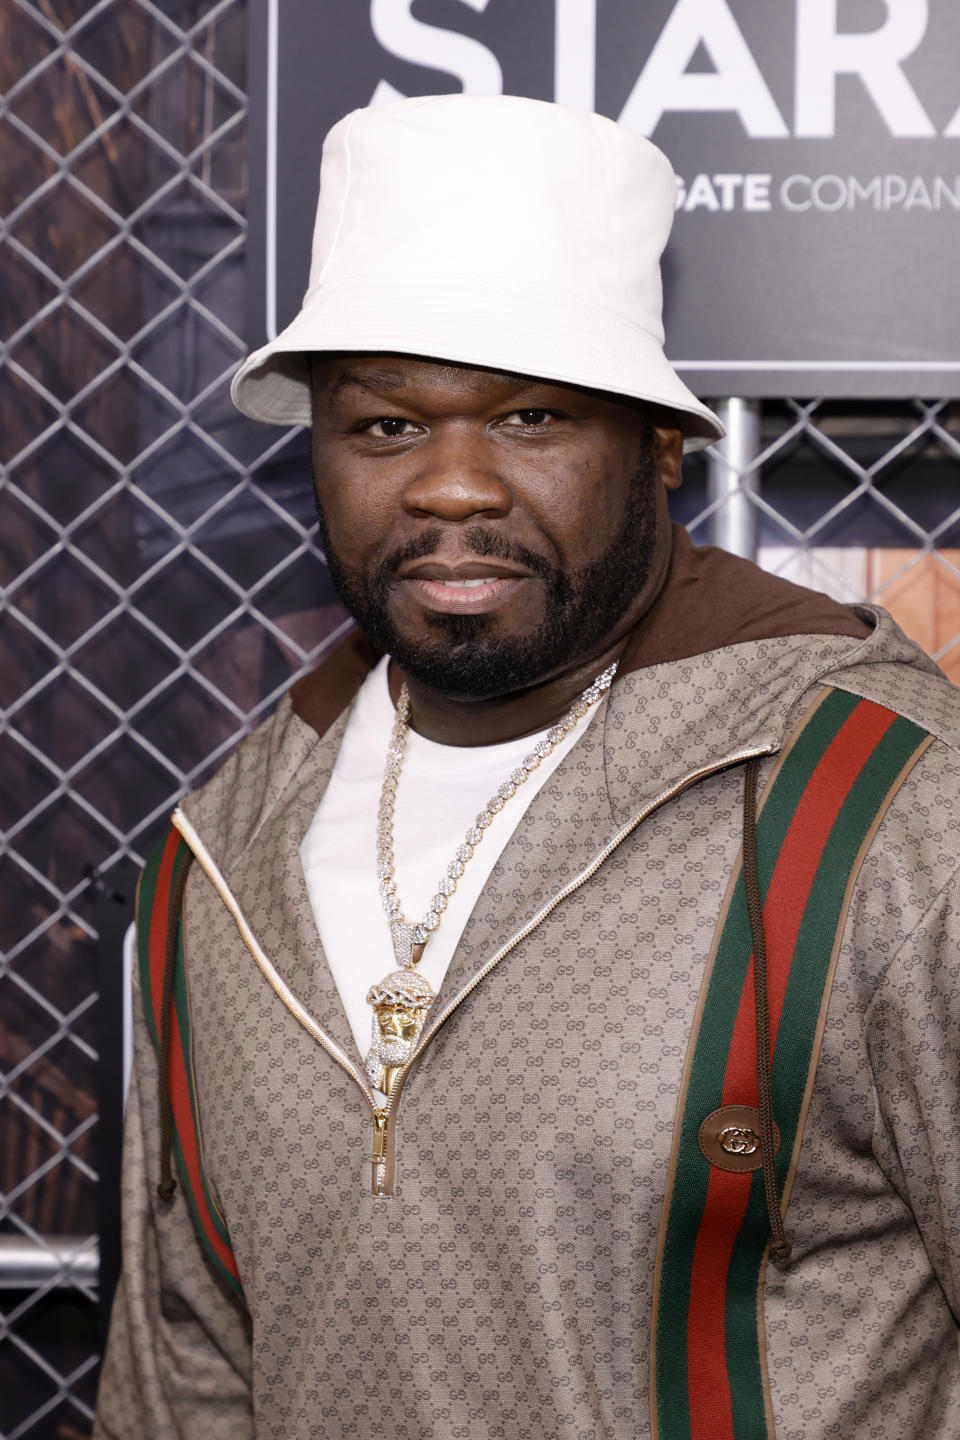 NEW YORK, NEW YORK – JULY 15: 50 Cent attends ‘Power Book III: Raising Kanan’ global premiere event and screening at Hammerstein Ballroom on July 15, 2021 in New York City. (Photo by Jamie McCarthy/Getty Images for STARZ)